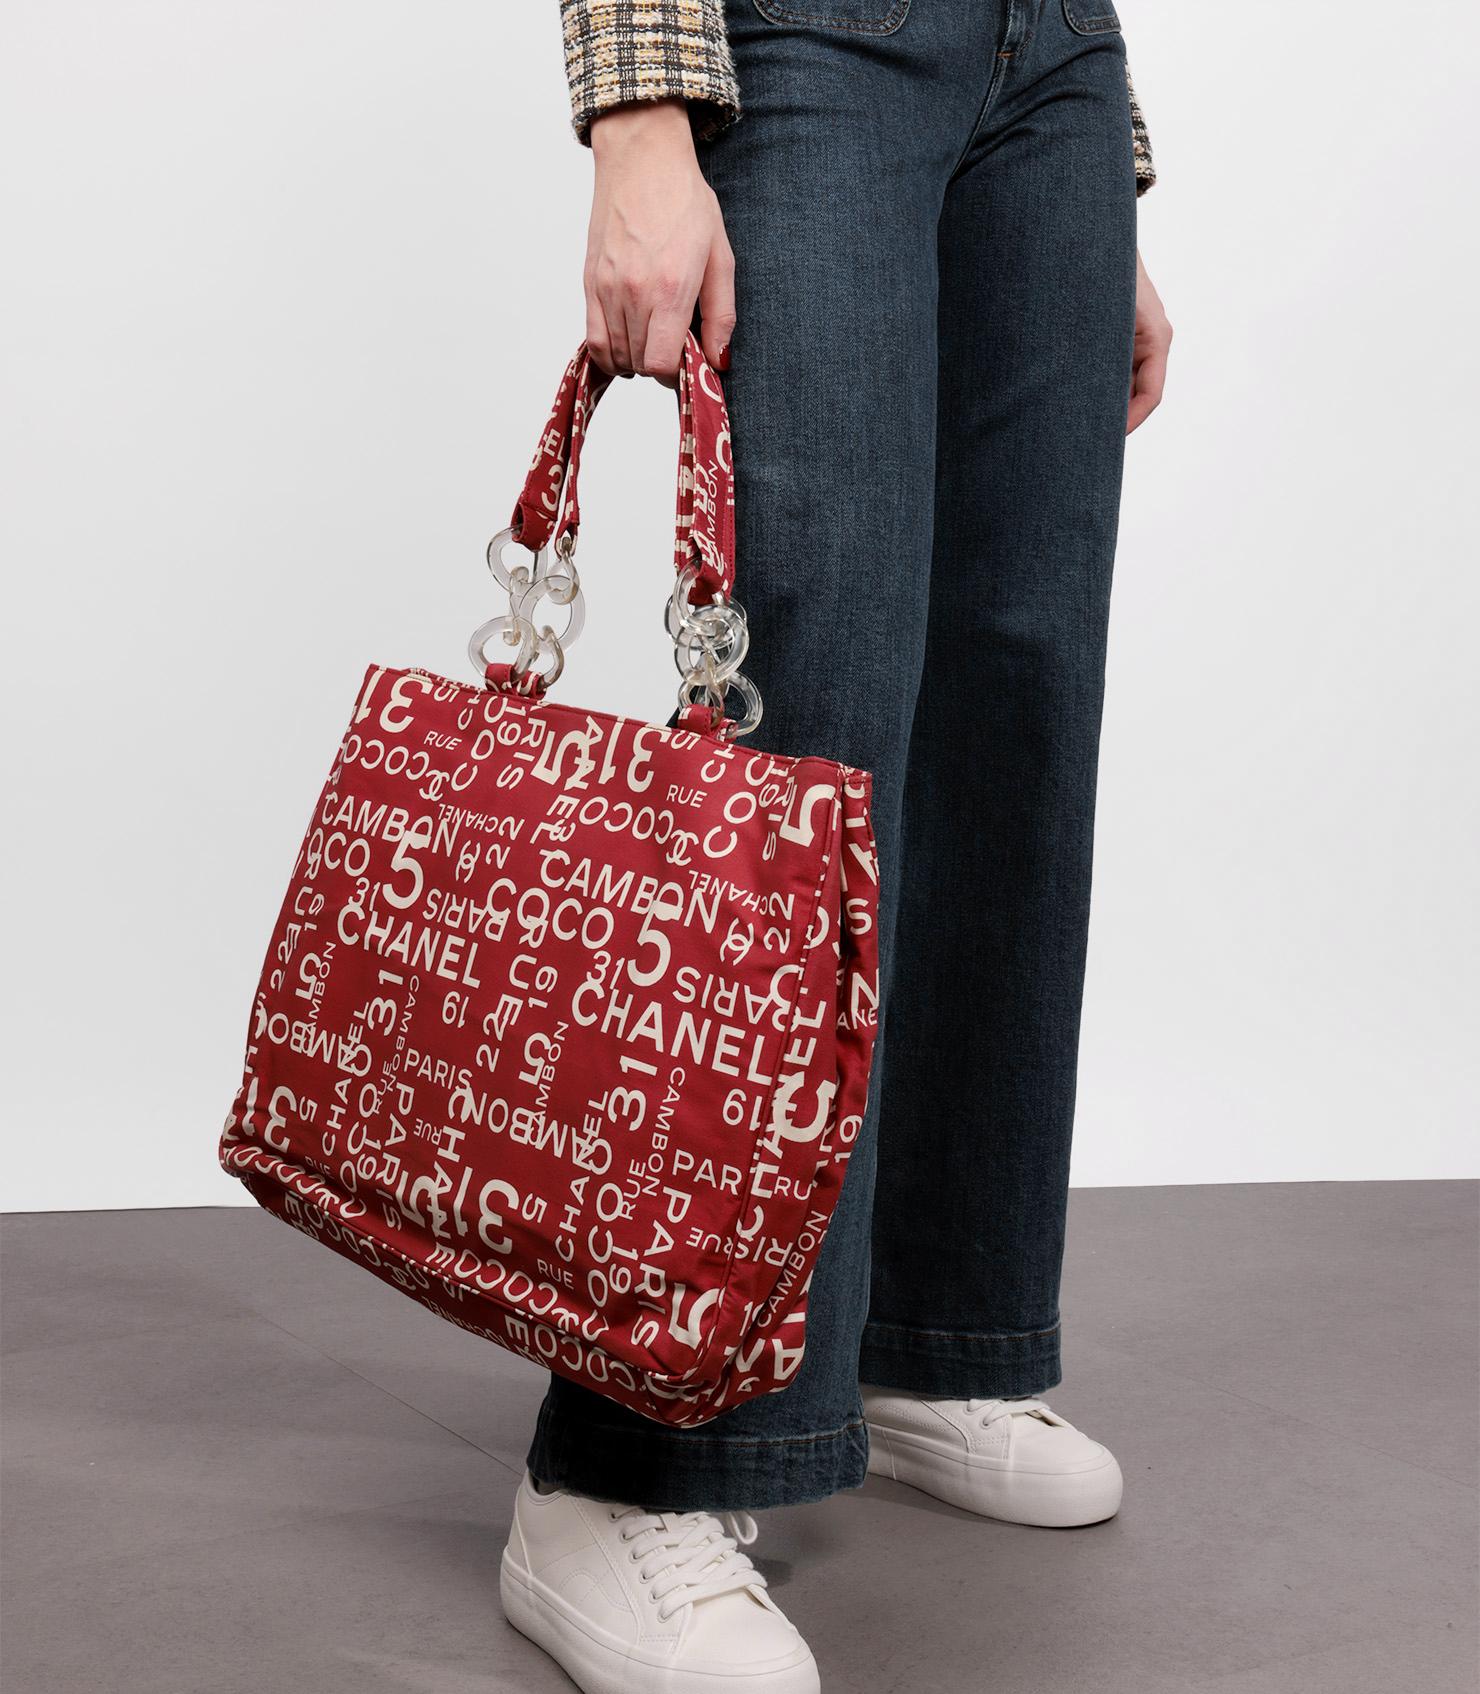 Chanel Red & White Patterned Canvas Vintage 31 Rue Cambon Beach Tote

Brand- Chanel
Model- 31 Rue Cambon Beach Tote
Product Type- Tote
Serial Number- 74*****
Age- Circa 2002
Accompanied By- Chanel Dust Bag, Interior Phone Case
Colour- Red
Hardware-